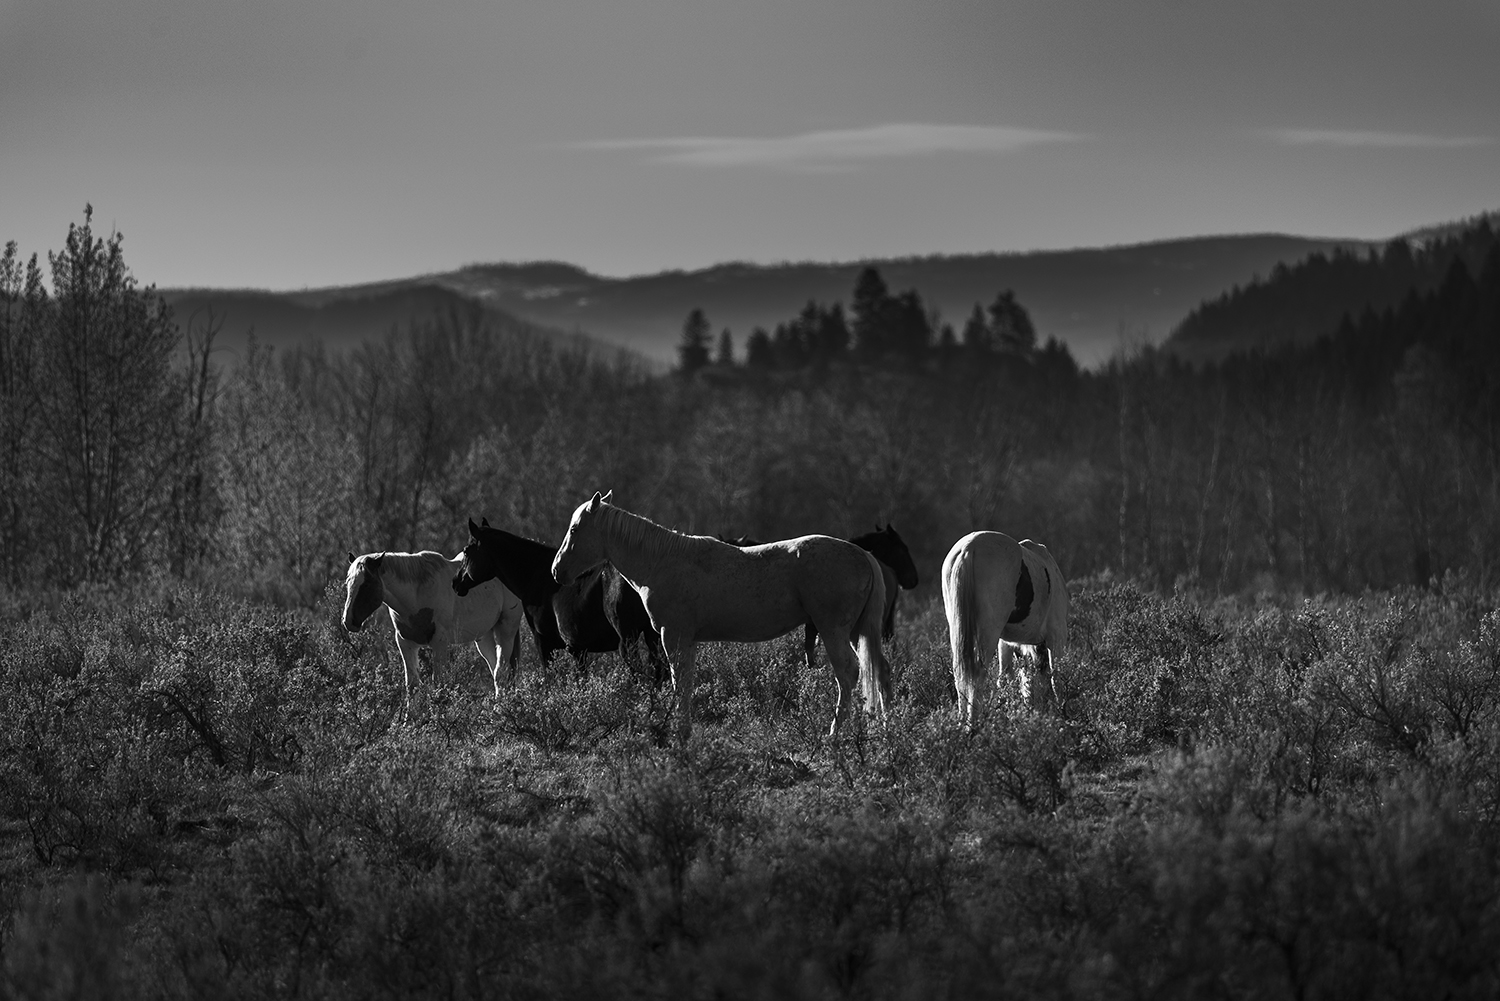 Kamloops grayscale photo of horses and tall grass